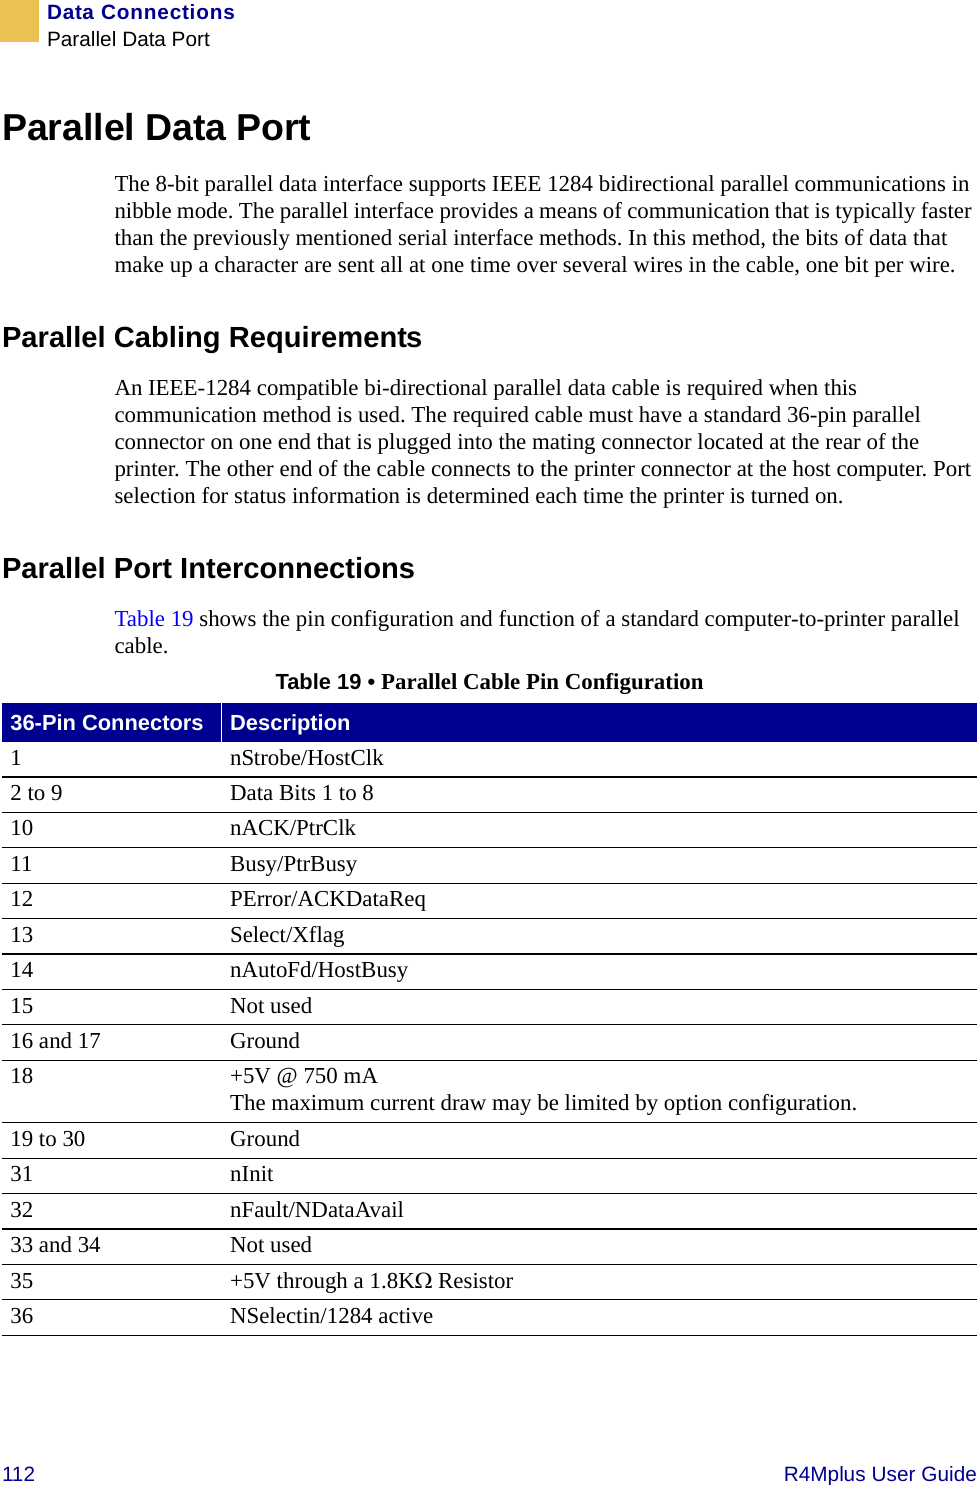 112   R4Mplus User GuideData ConnectionsParallel Data PortParallel Data PortThe 8-bit parallel data interface supports IEEE 1284 bidirectional parallel communications in nibble mode. The parallel interface provides a means of communication that is typically faster than the previously mentioned serial interface methods. In this method, the bits of data that make up a character are sent all at one time over several wires in the cable, one bit per wire.Parallel Cabling RequirementsAn IEEE-1284 compatible bi-directional parallel data cable is required when this communication method is used. The required cable must have a standard 36-pin parallel connector on one end that is plugged into the mating connector located at the rear of the printer. The other end of the cable connects to the printer connector at the host computer. Port selection for status information is determined each time the printer is turned on.Parallel Port InterconnectionsTable 19 shows the pin configuration and function of a standard computer-to-printer parallel cable.Table 19 • Parallel Cable Pin Configuration36-Pin Connectors Description1 nStrobe/HostClk2 to 9 Data Bits 1 to 810 nACK/PtrClk11 Busy/PtrBusy12 PError/ACKDataReq13 Select/Xflag14 nAutoFd/HostBusy15 Not used16 and 17 Ground18 +5V @ 750 mAThe maximum current draw may be limited by option configuration. 19 to 30 Ground31 nInit32 nFault/NDataAvail33 and 34 Not used35 +5V through a 1.8KΩ Resistor36 NSelectin/1284 active